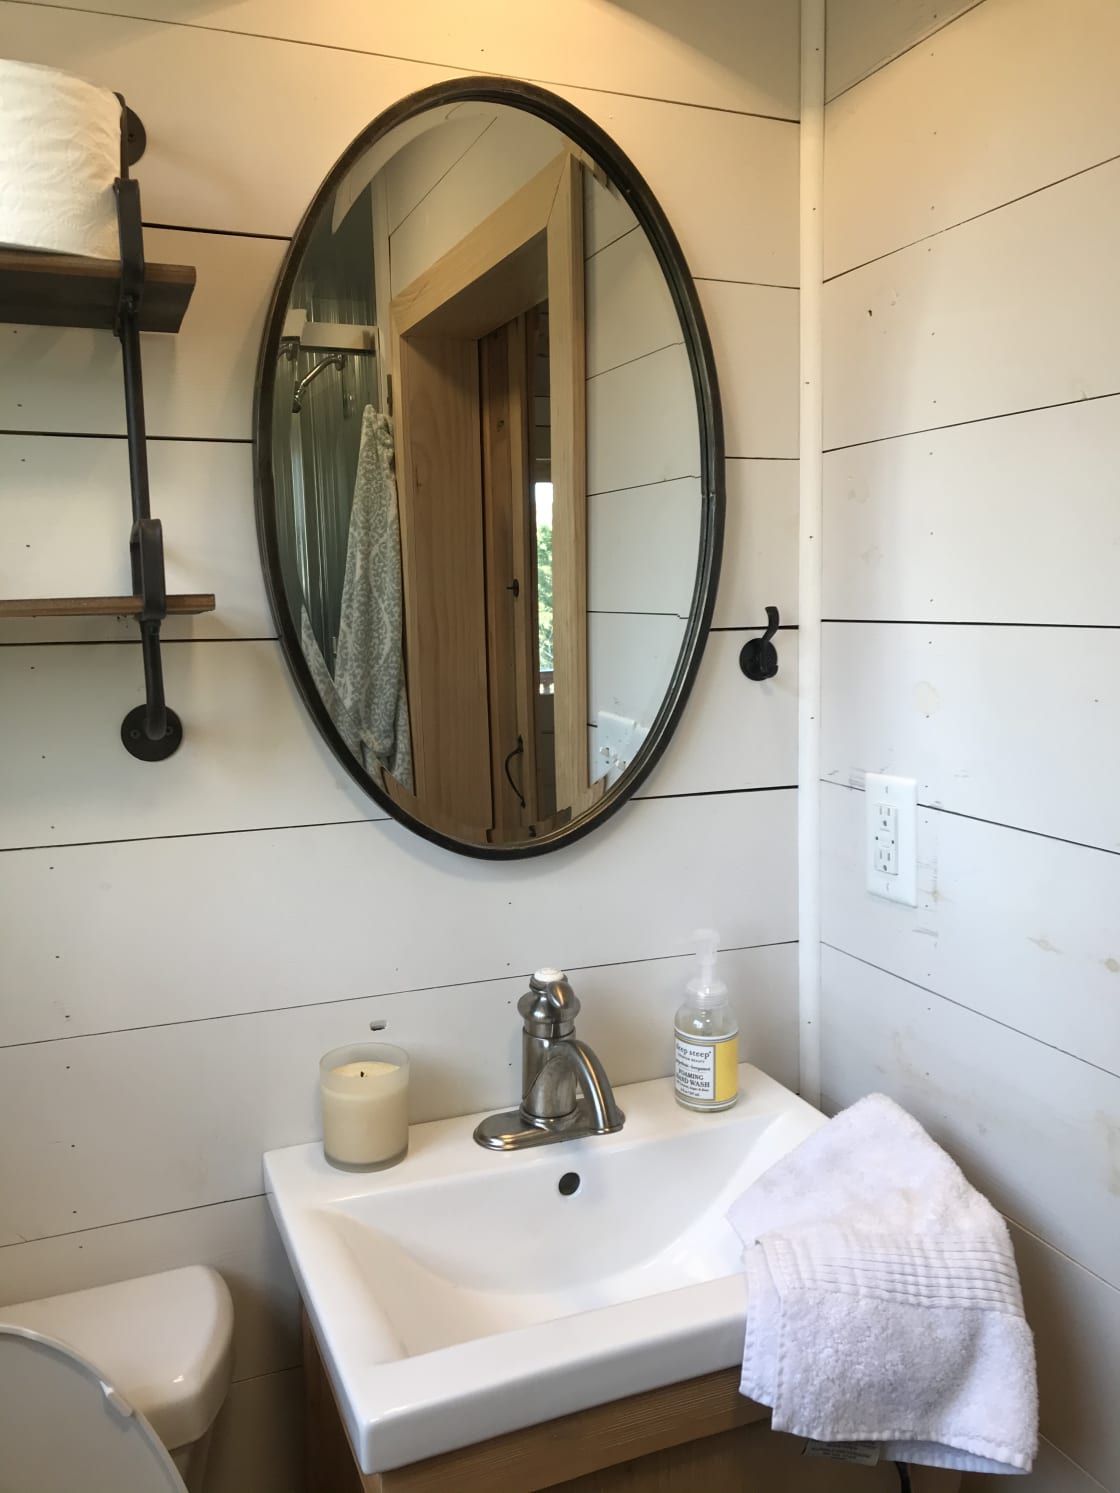 Clean and lovely, our shared bathroom has several amenities for you to enjoy: hair drier, shampoo, soap and a few essentials you might have missed.  